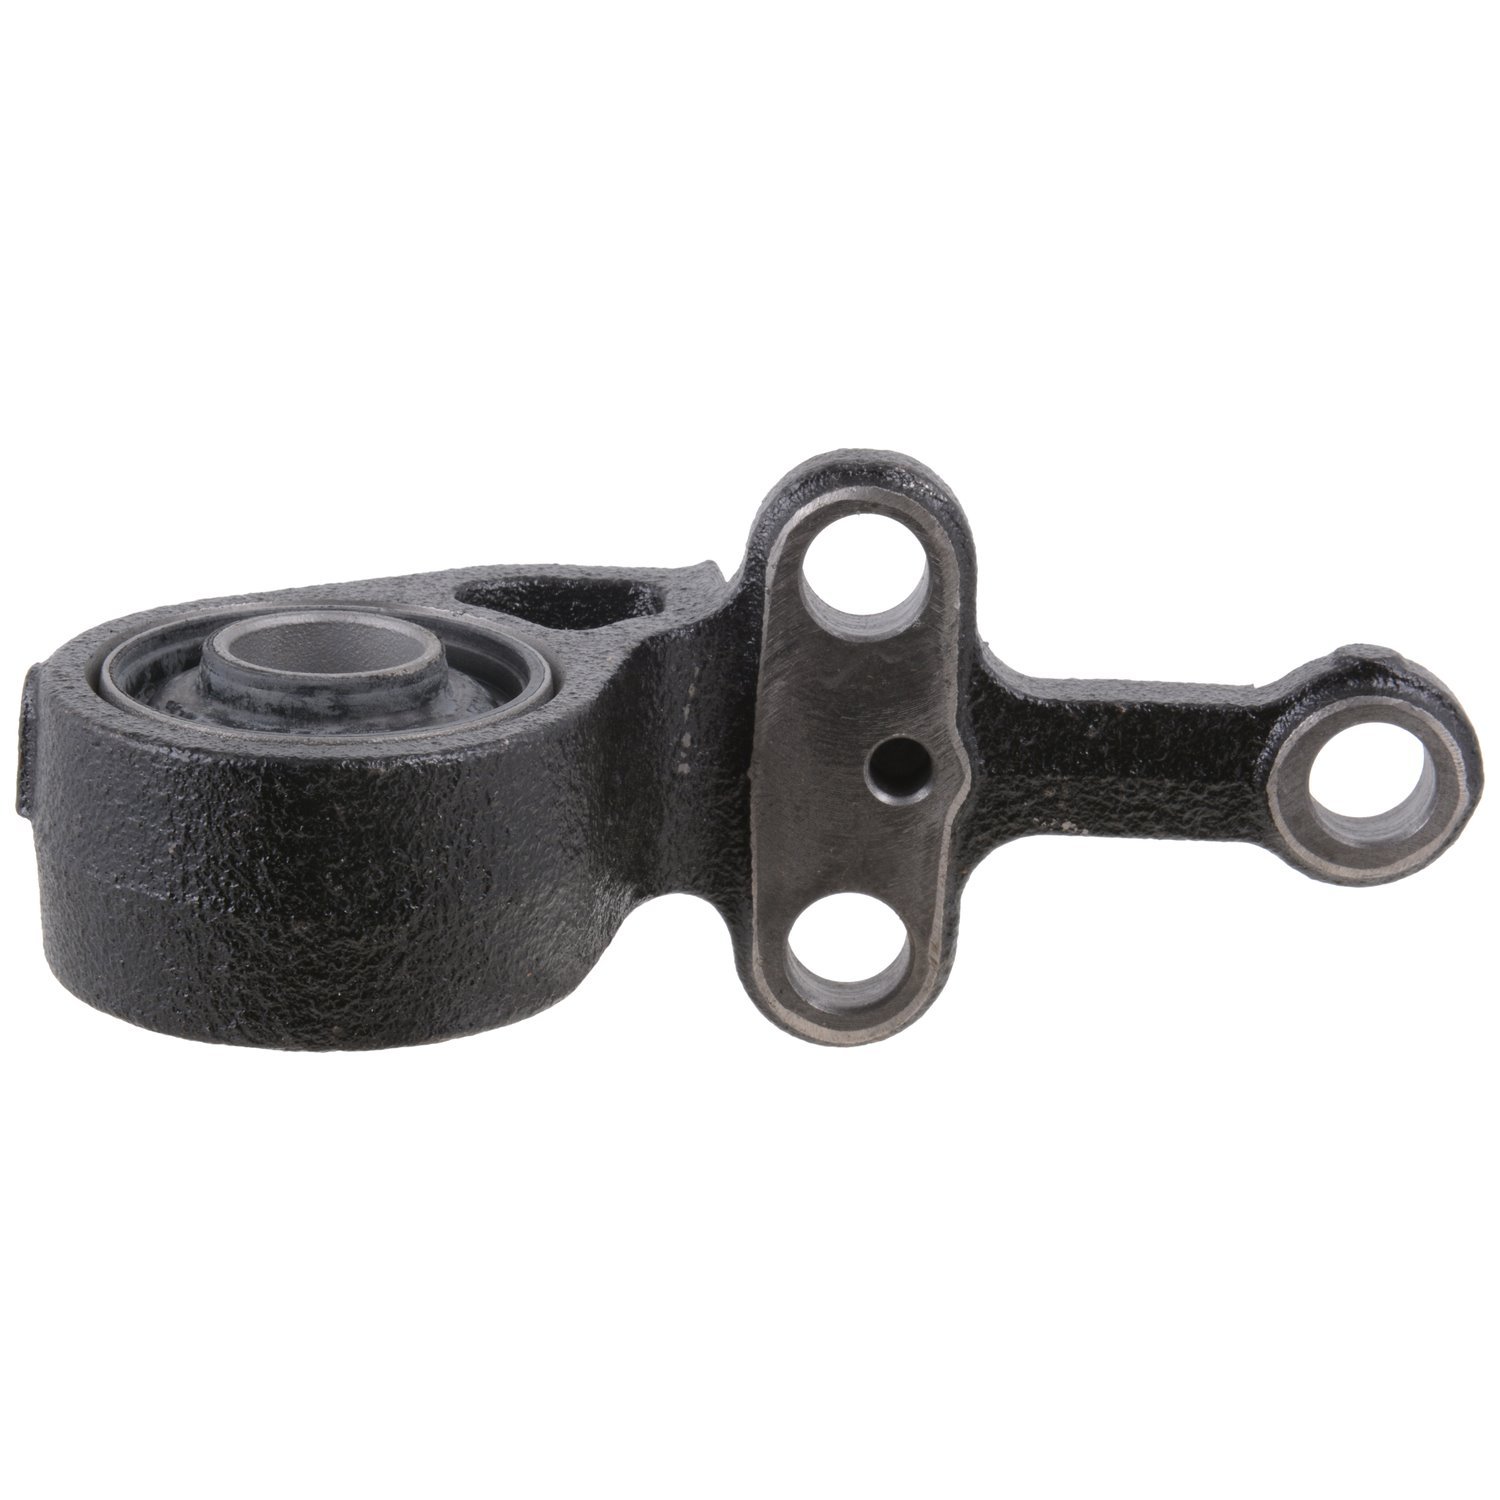 JBU1453 Control Arm Bushing Fits Select Nissan Models, Position: Left/Driver or Right/Passenger, Front Lower Rearward